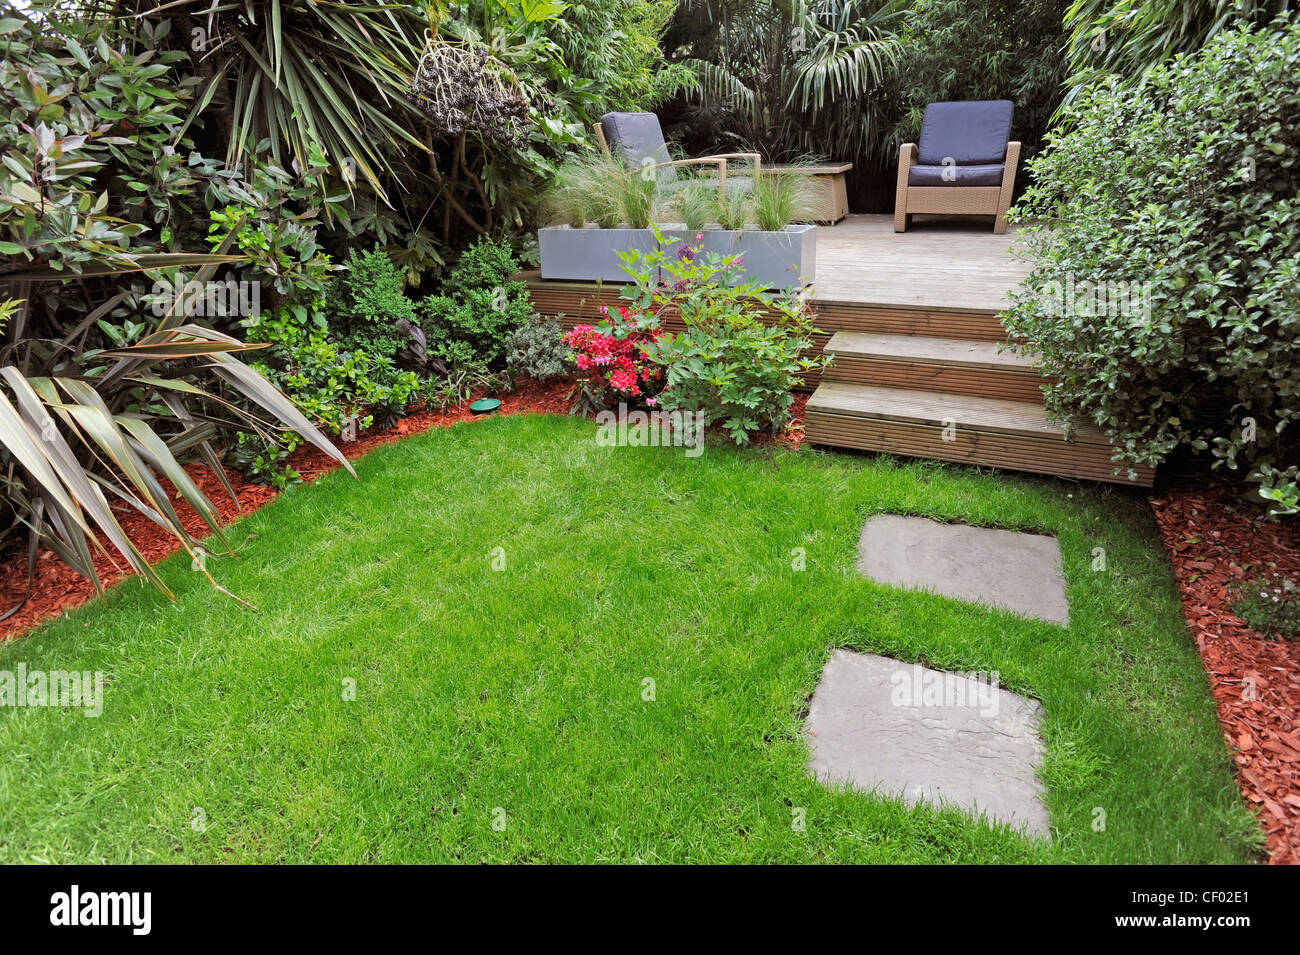 urban oasis a small garden with patio and raised decking area in